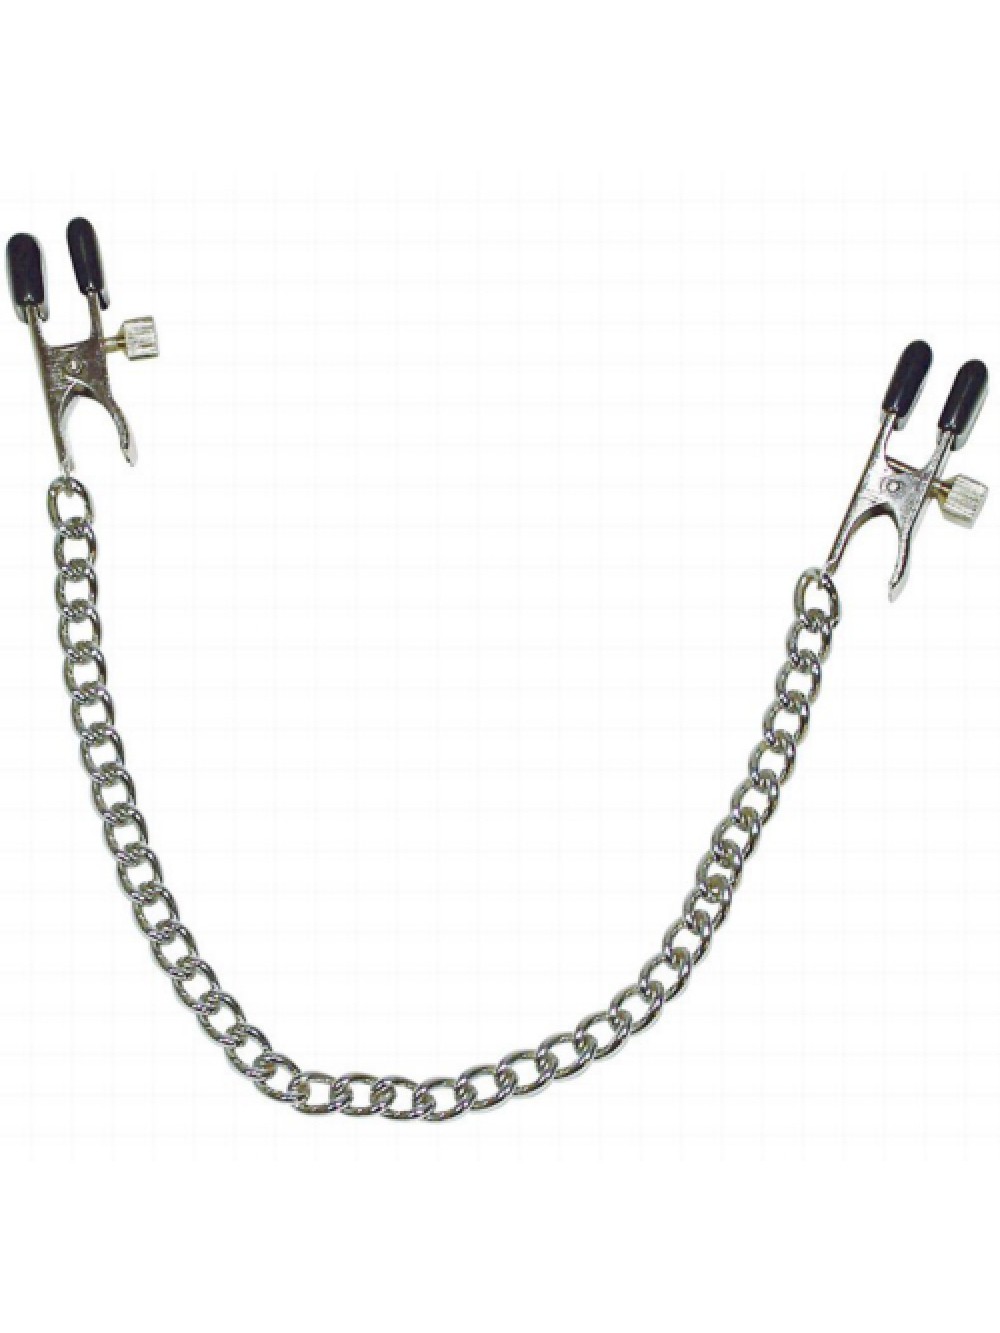 Two nipple clips with screw clamps